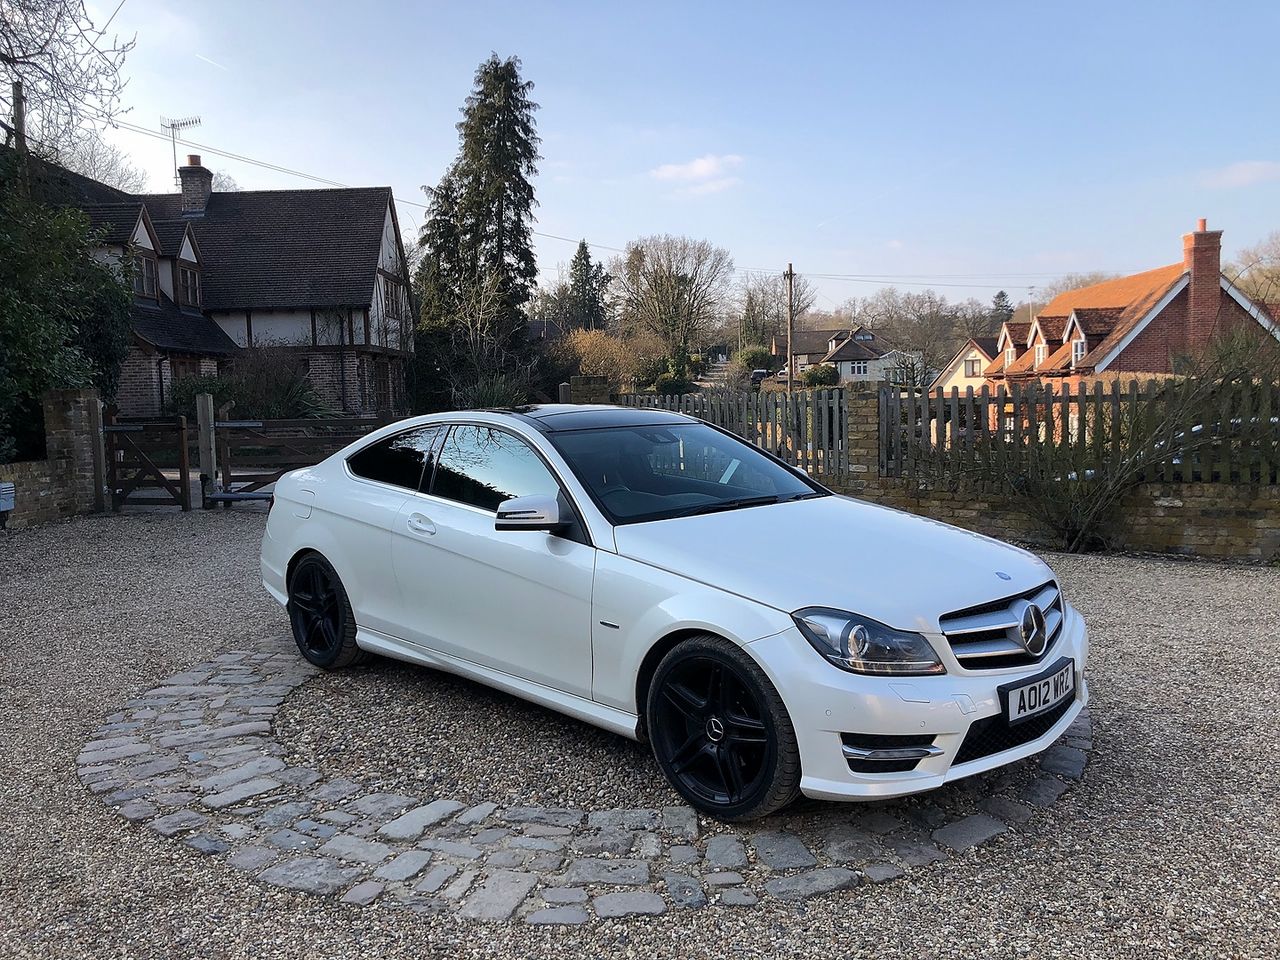 2012 MERCEDES C-class C 250 CDI BlueEFFICIENCY AMG Sport Auto - Picture 1 of 13